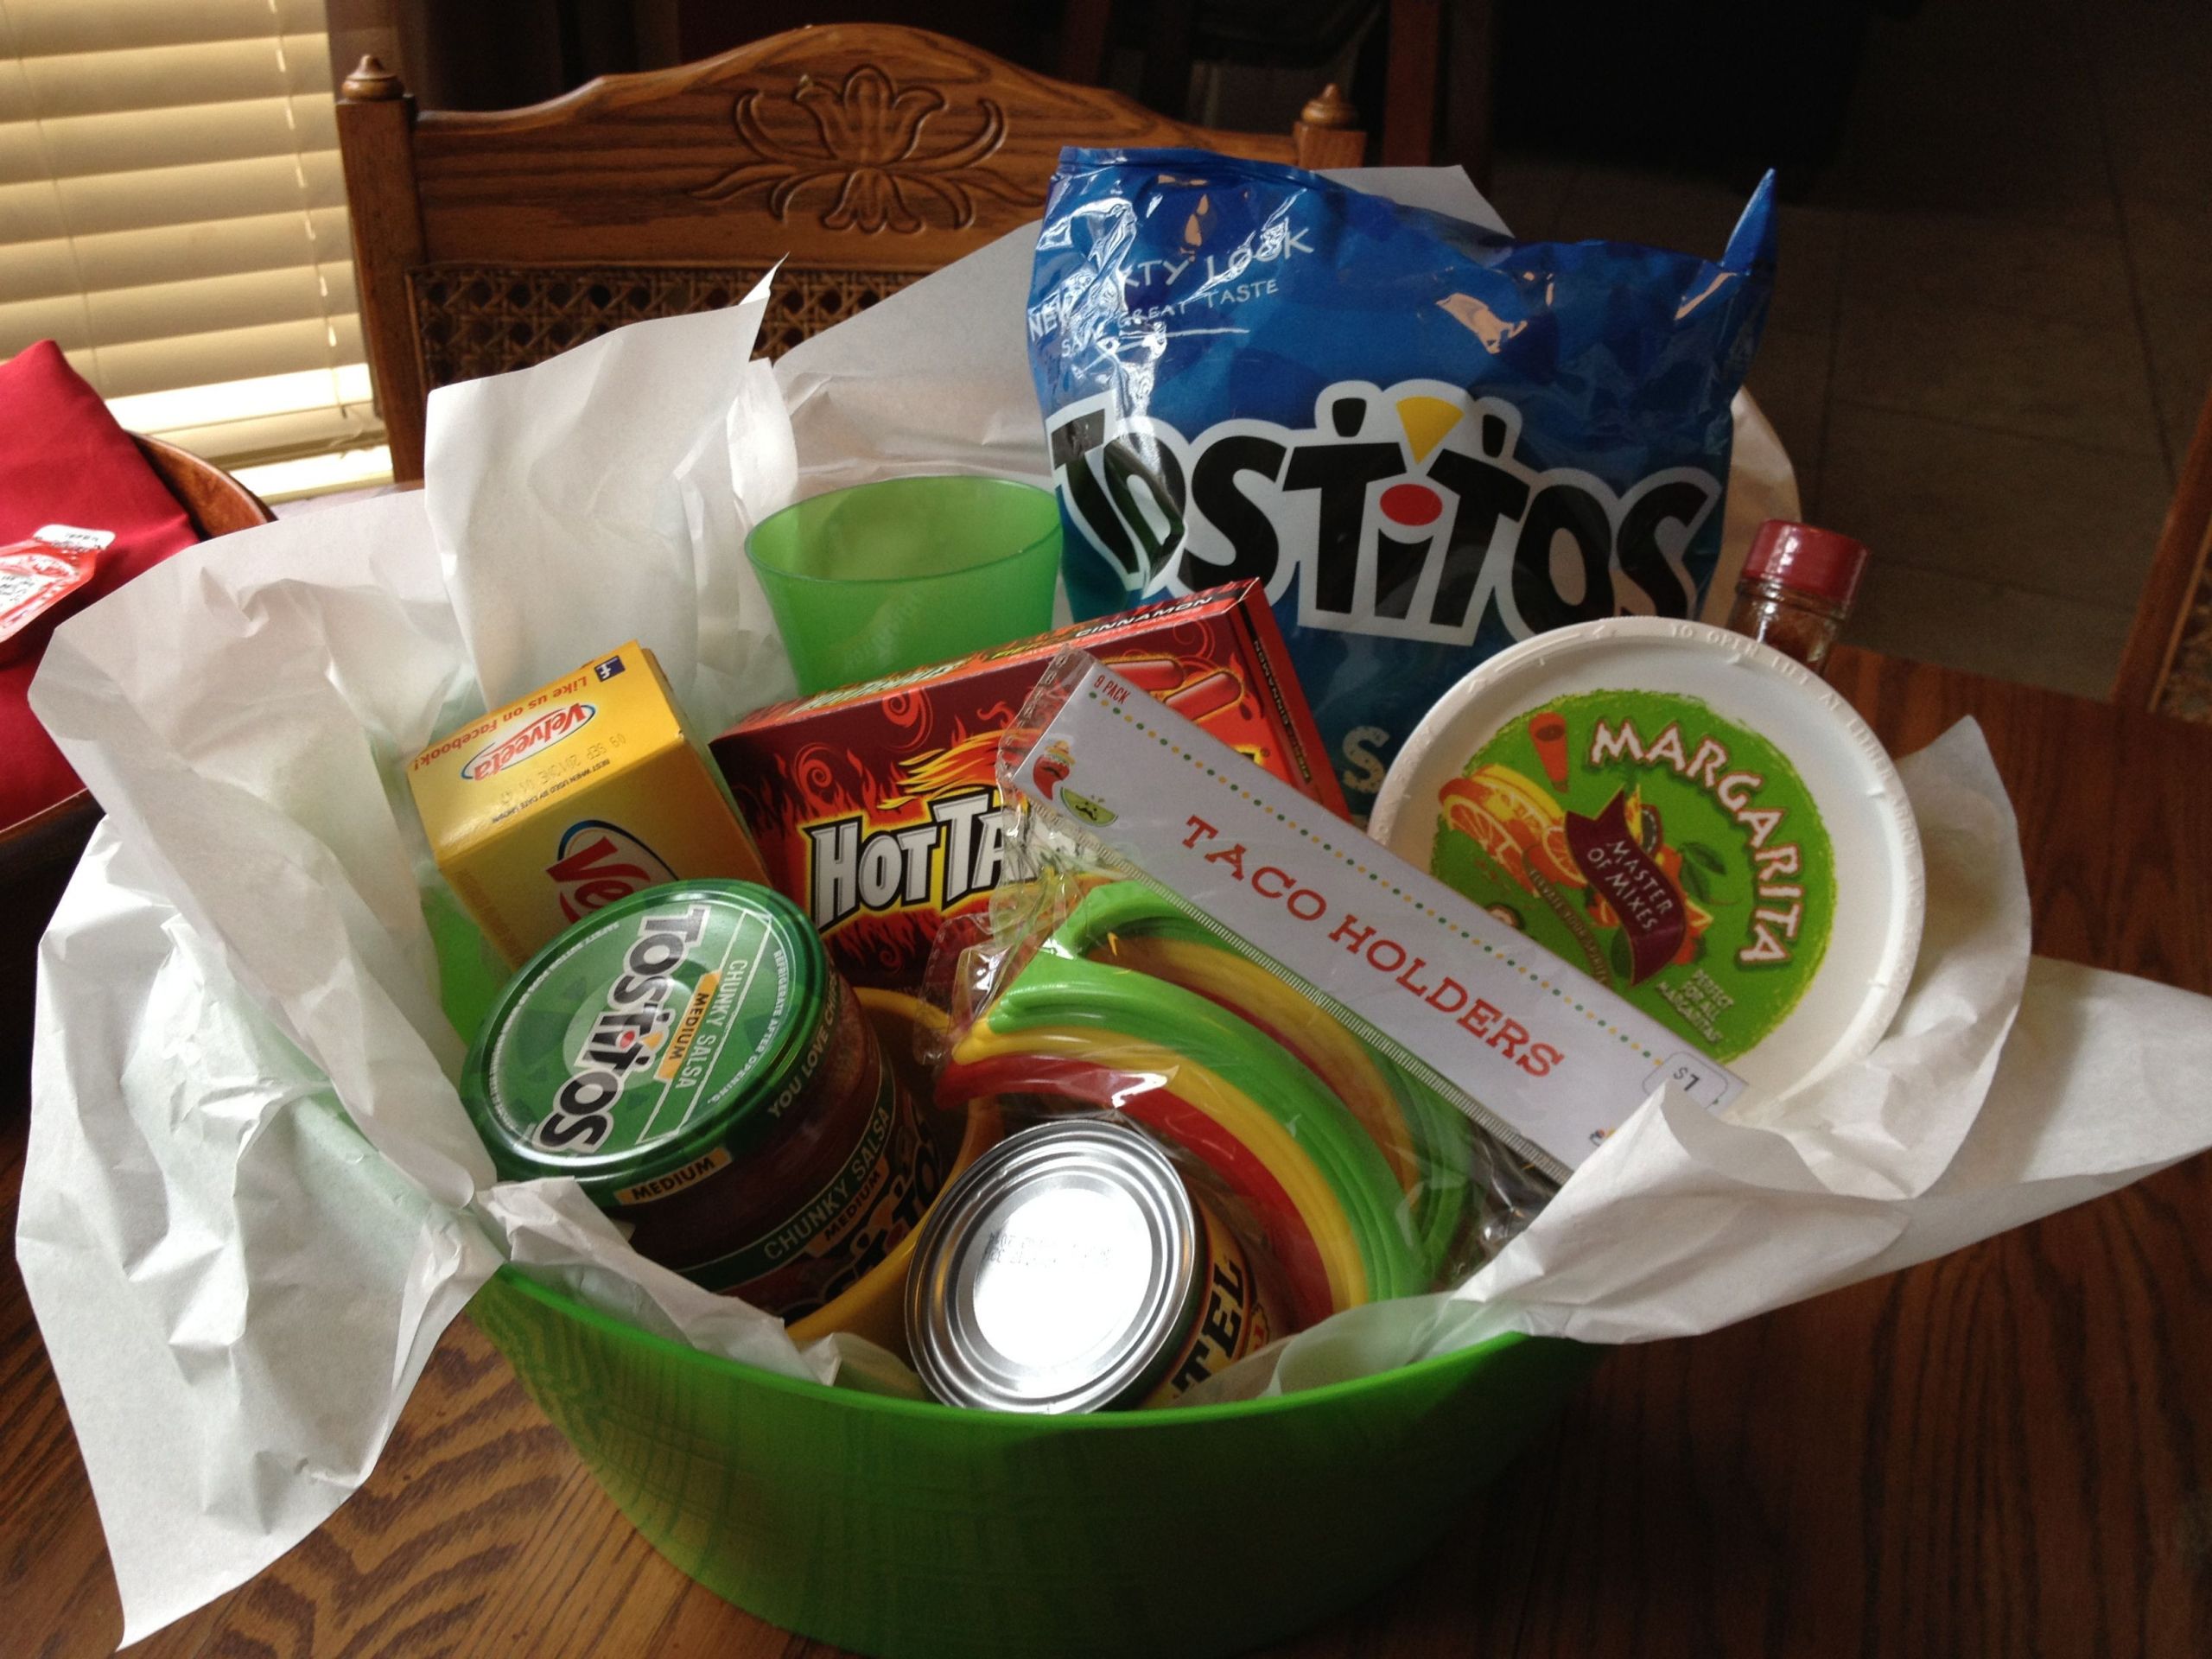 Mexican Themed Gift Basket Ideas
 Cinco de mayo themed basket bunko prize or great for